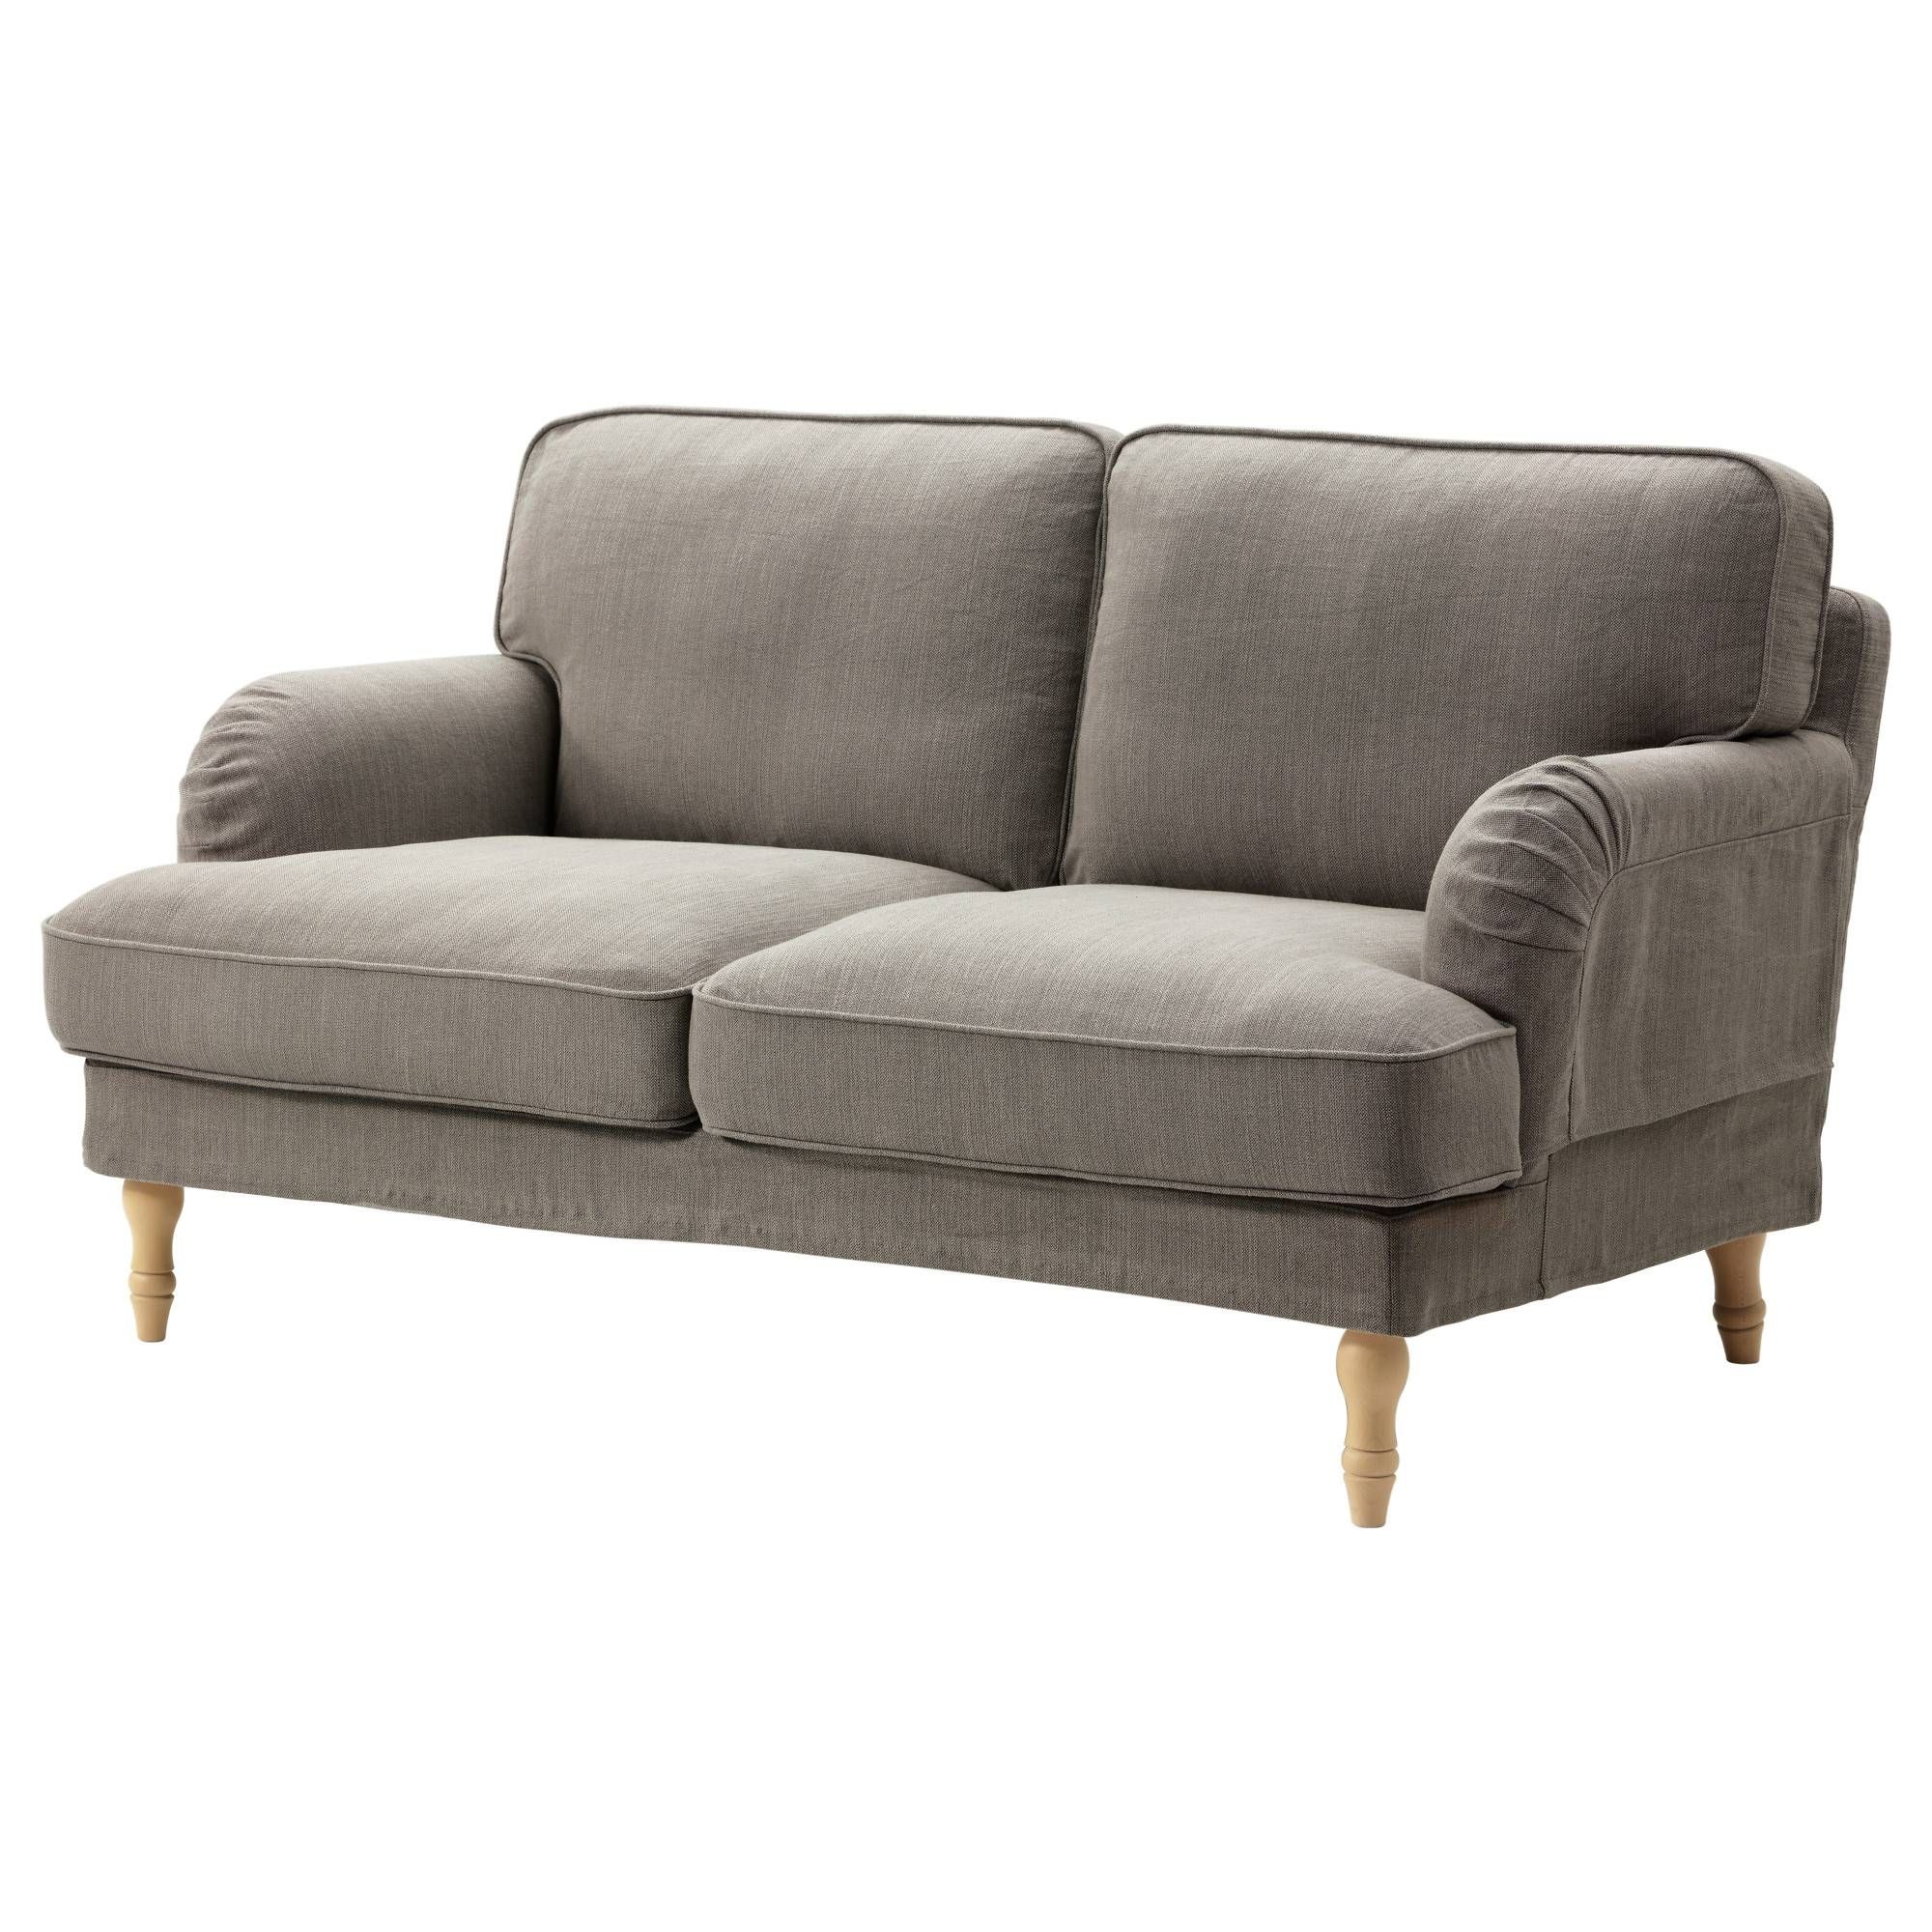 Fabric Sofas – Modern & Contemporary – Ikea With Regard To Contemporary Fabric Sofas (View 7 of 30)